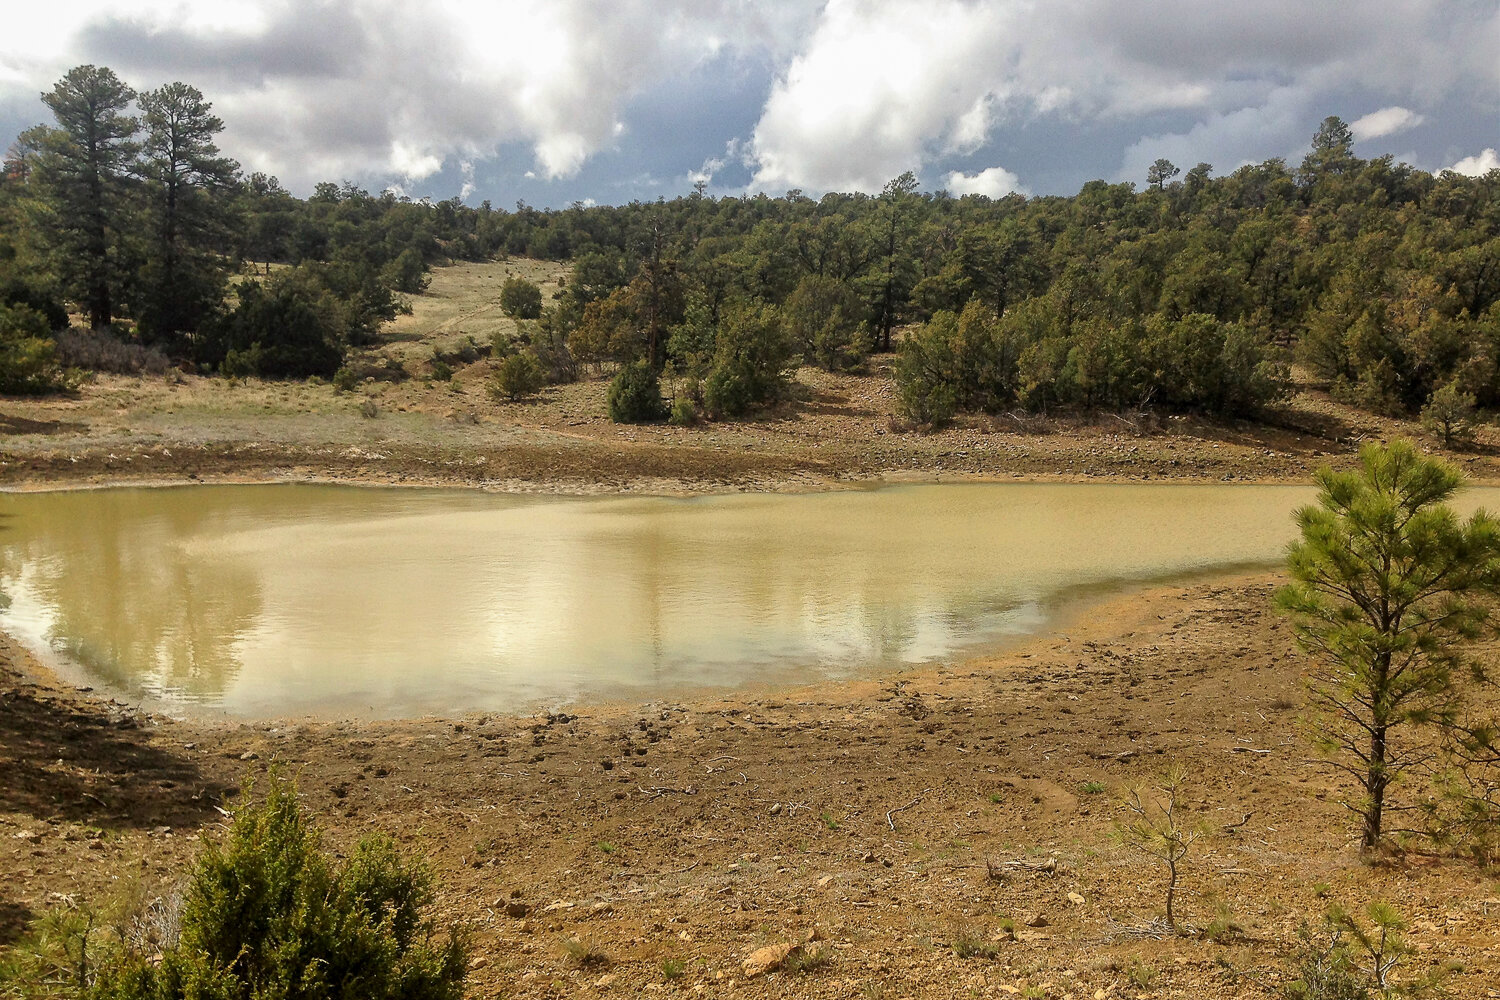 A muddy pond called a 'tank' - common water sources in parts of New mexico and Wyoming